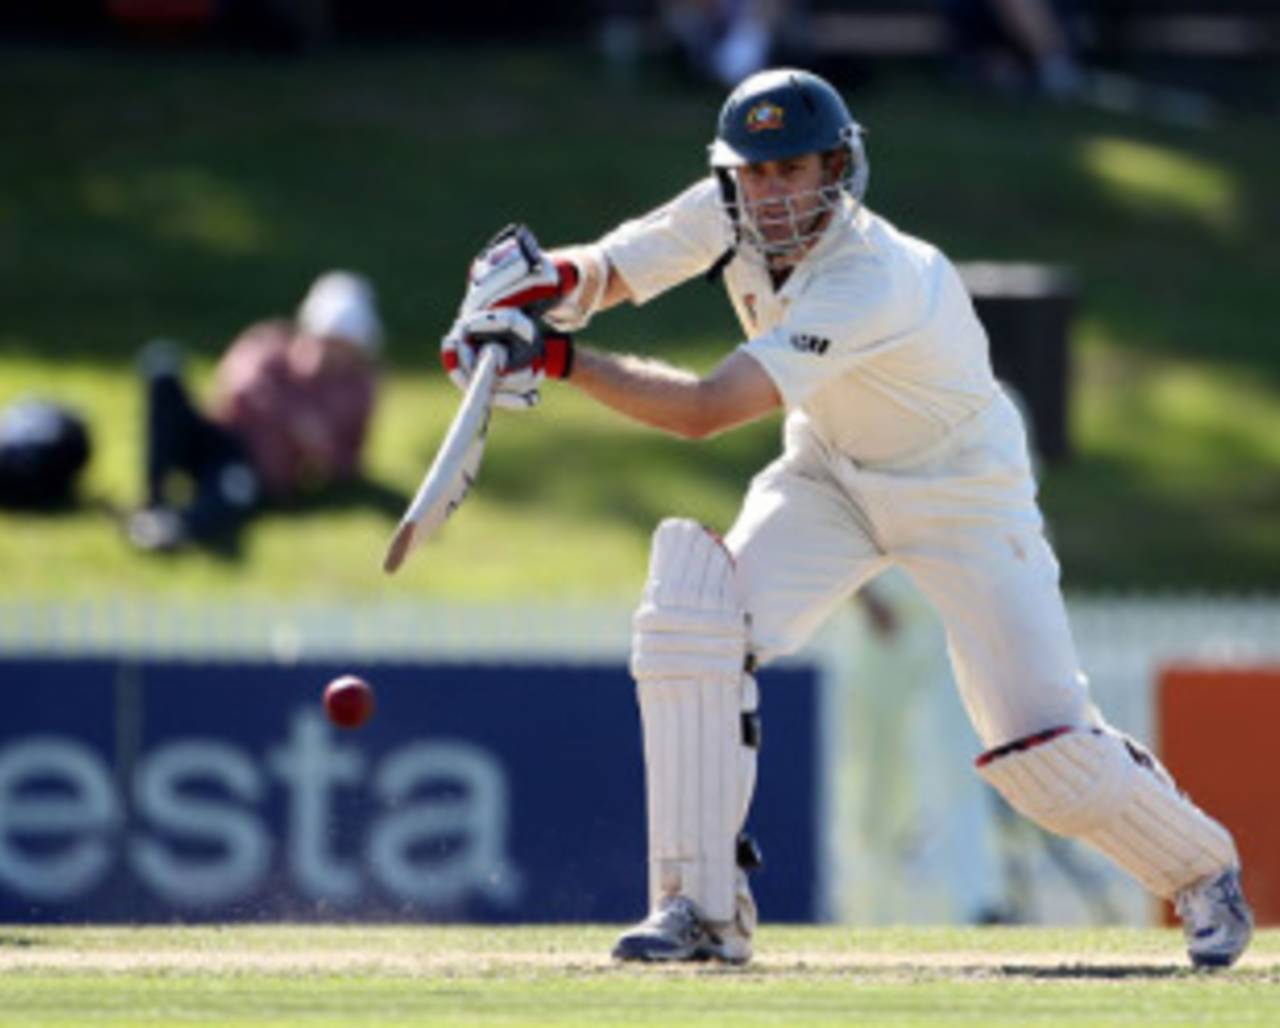 Simon Katich didn't want to take any risks and was rewarded with a slow but sensible century&nbsp;&nbsp;&bull;&nbsp;&nbsp;Getty Images